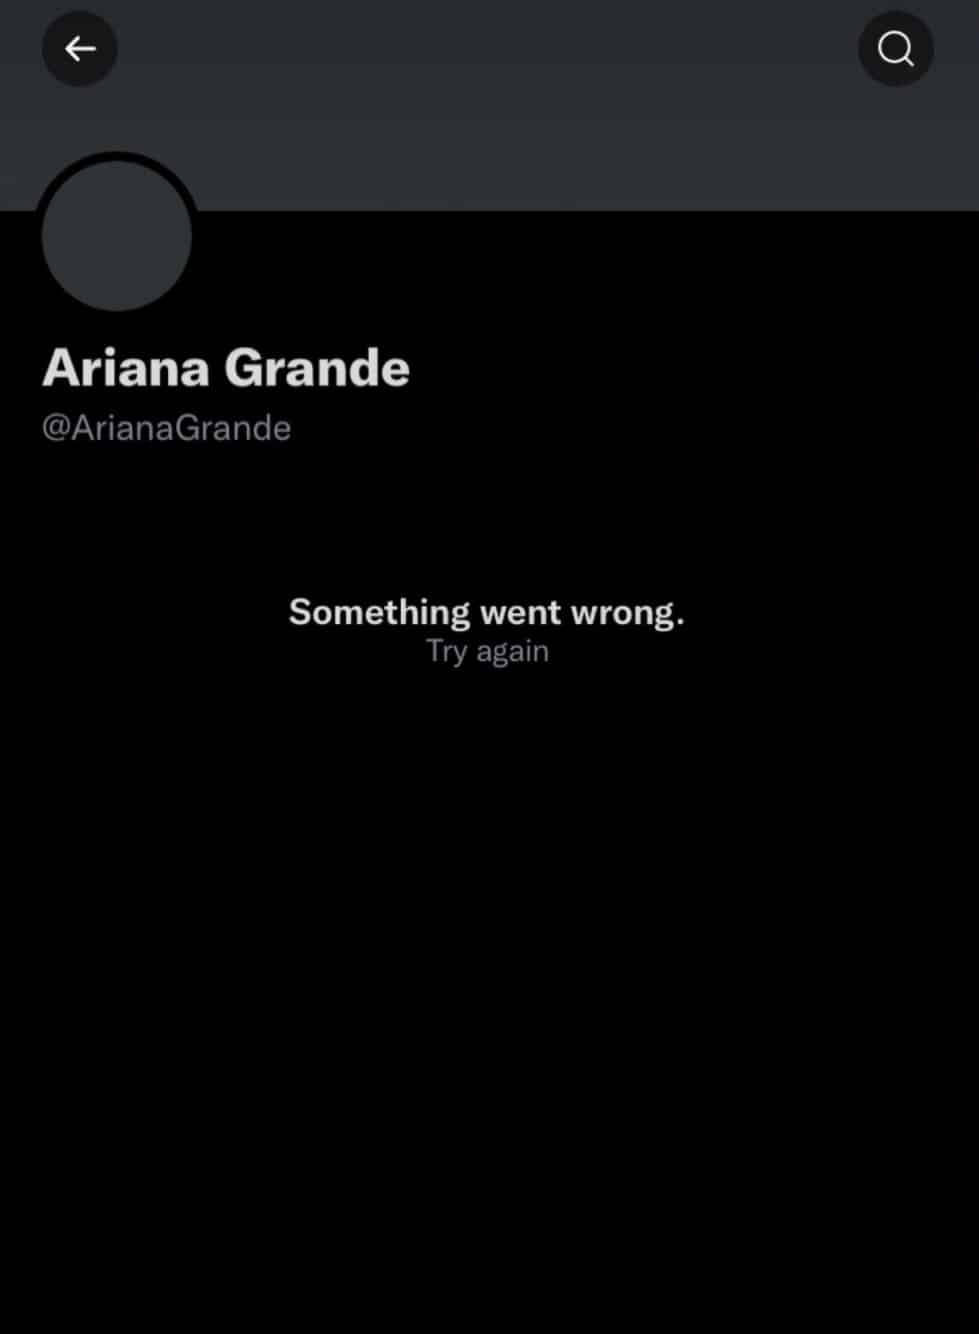 Ariana Grande Twitter account deleted